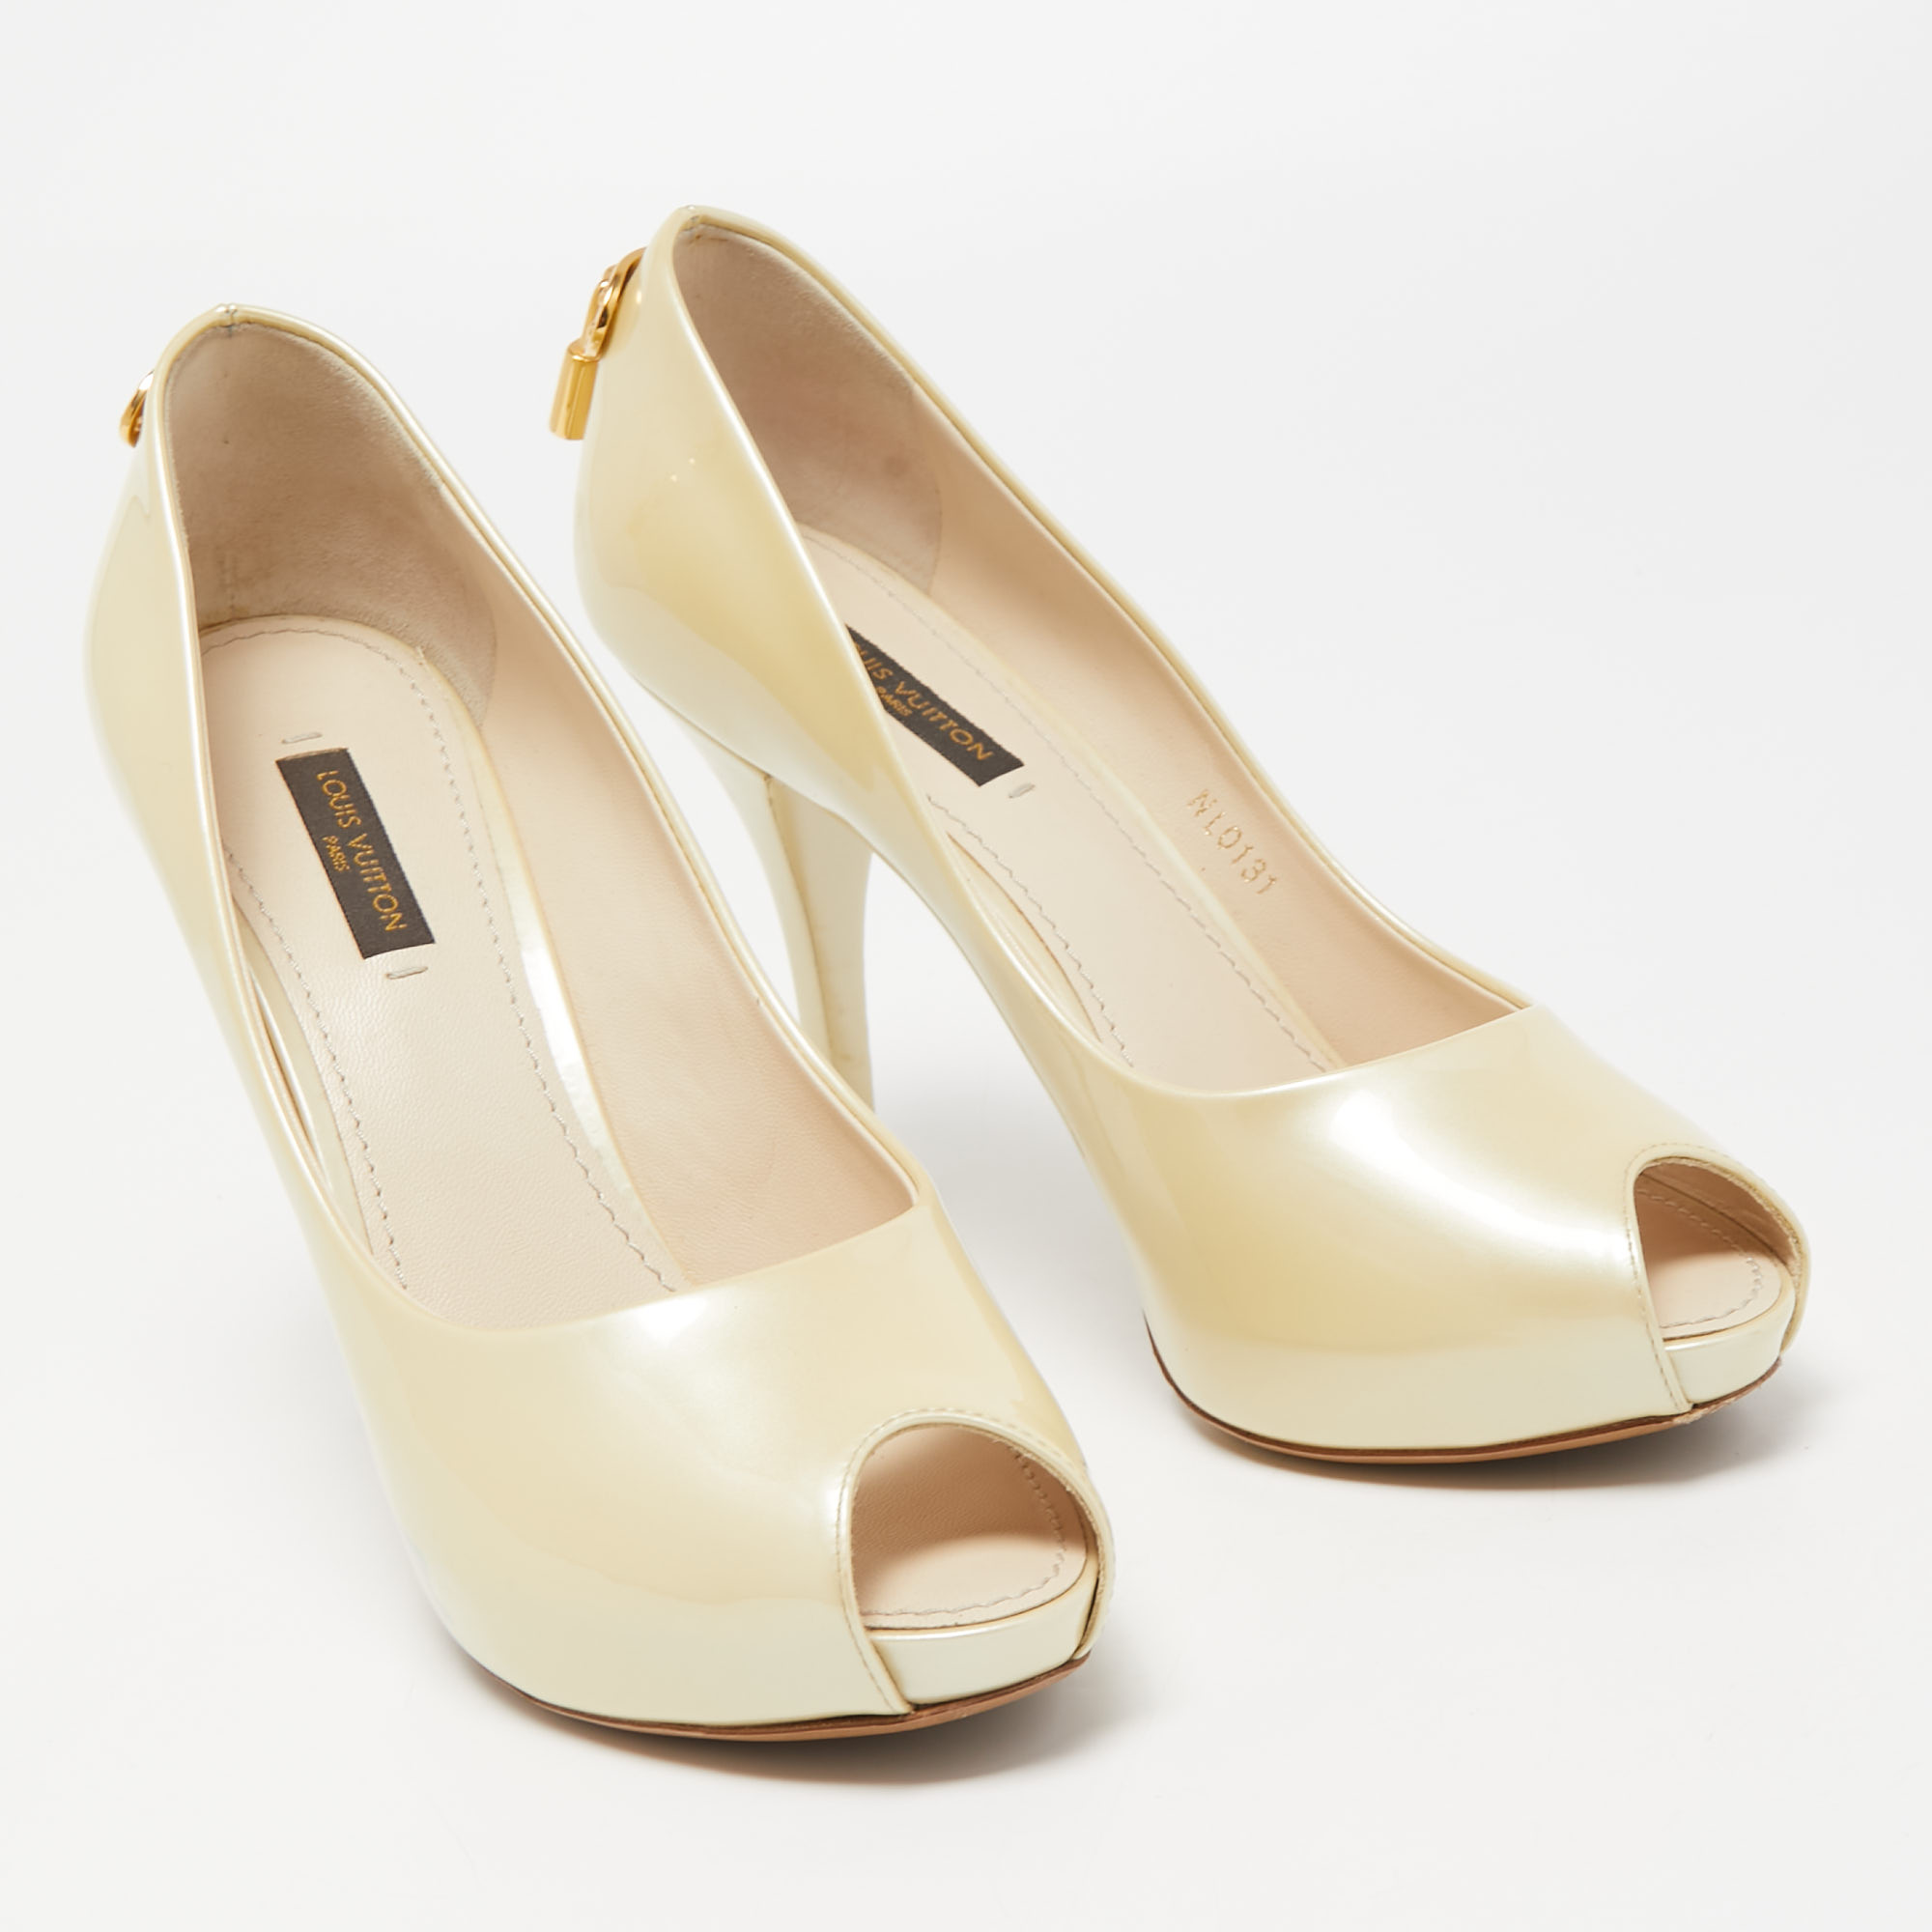 Louis Vuitton Cream Patent Leather Oh Really! Pumps Size 36.5